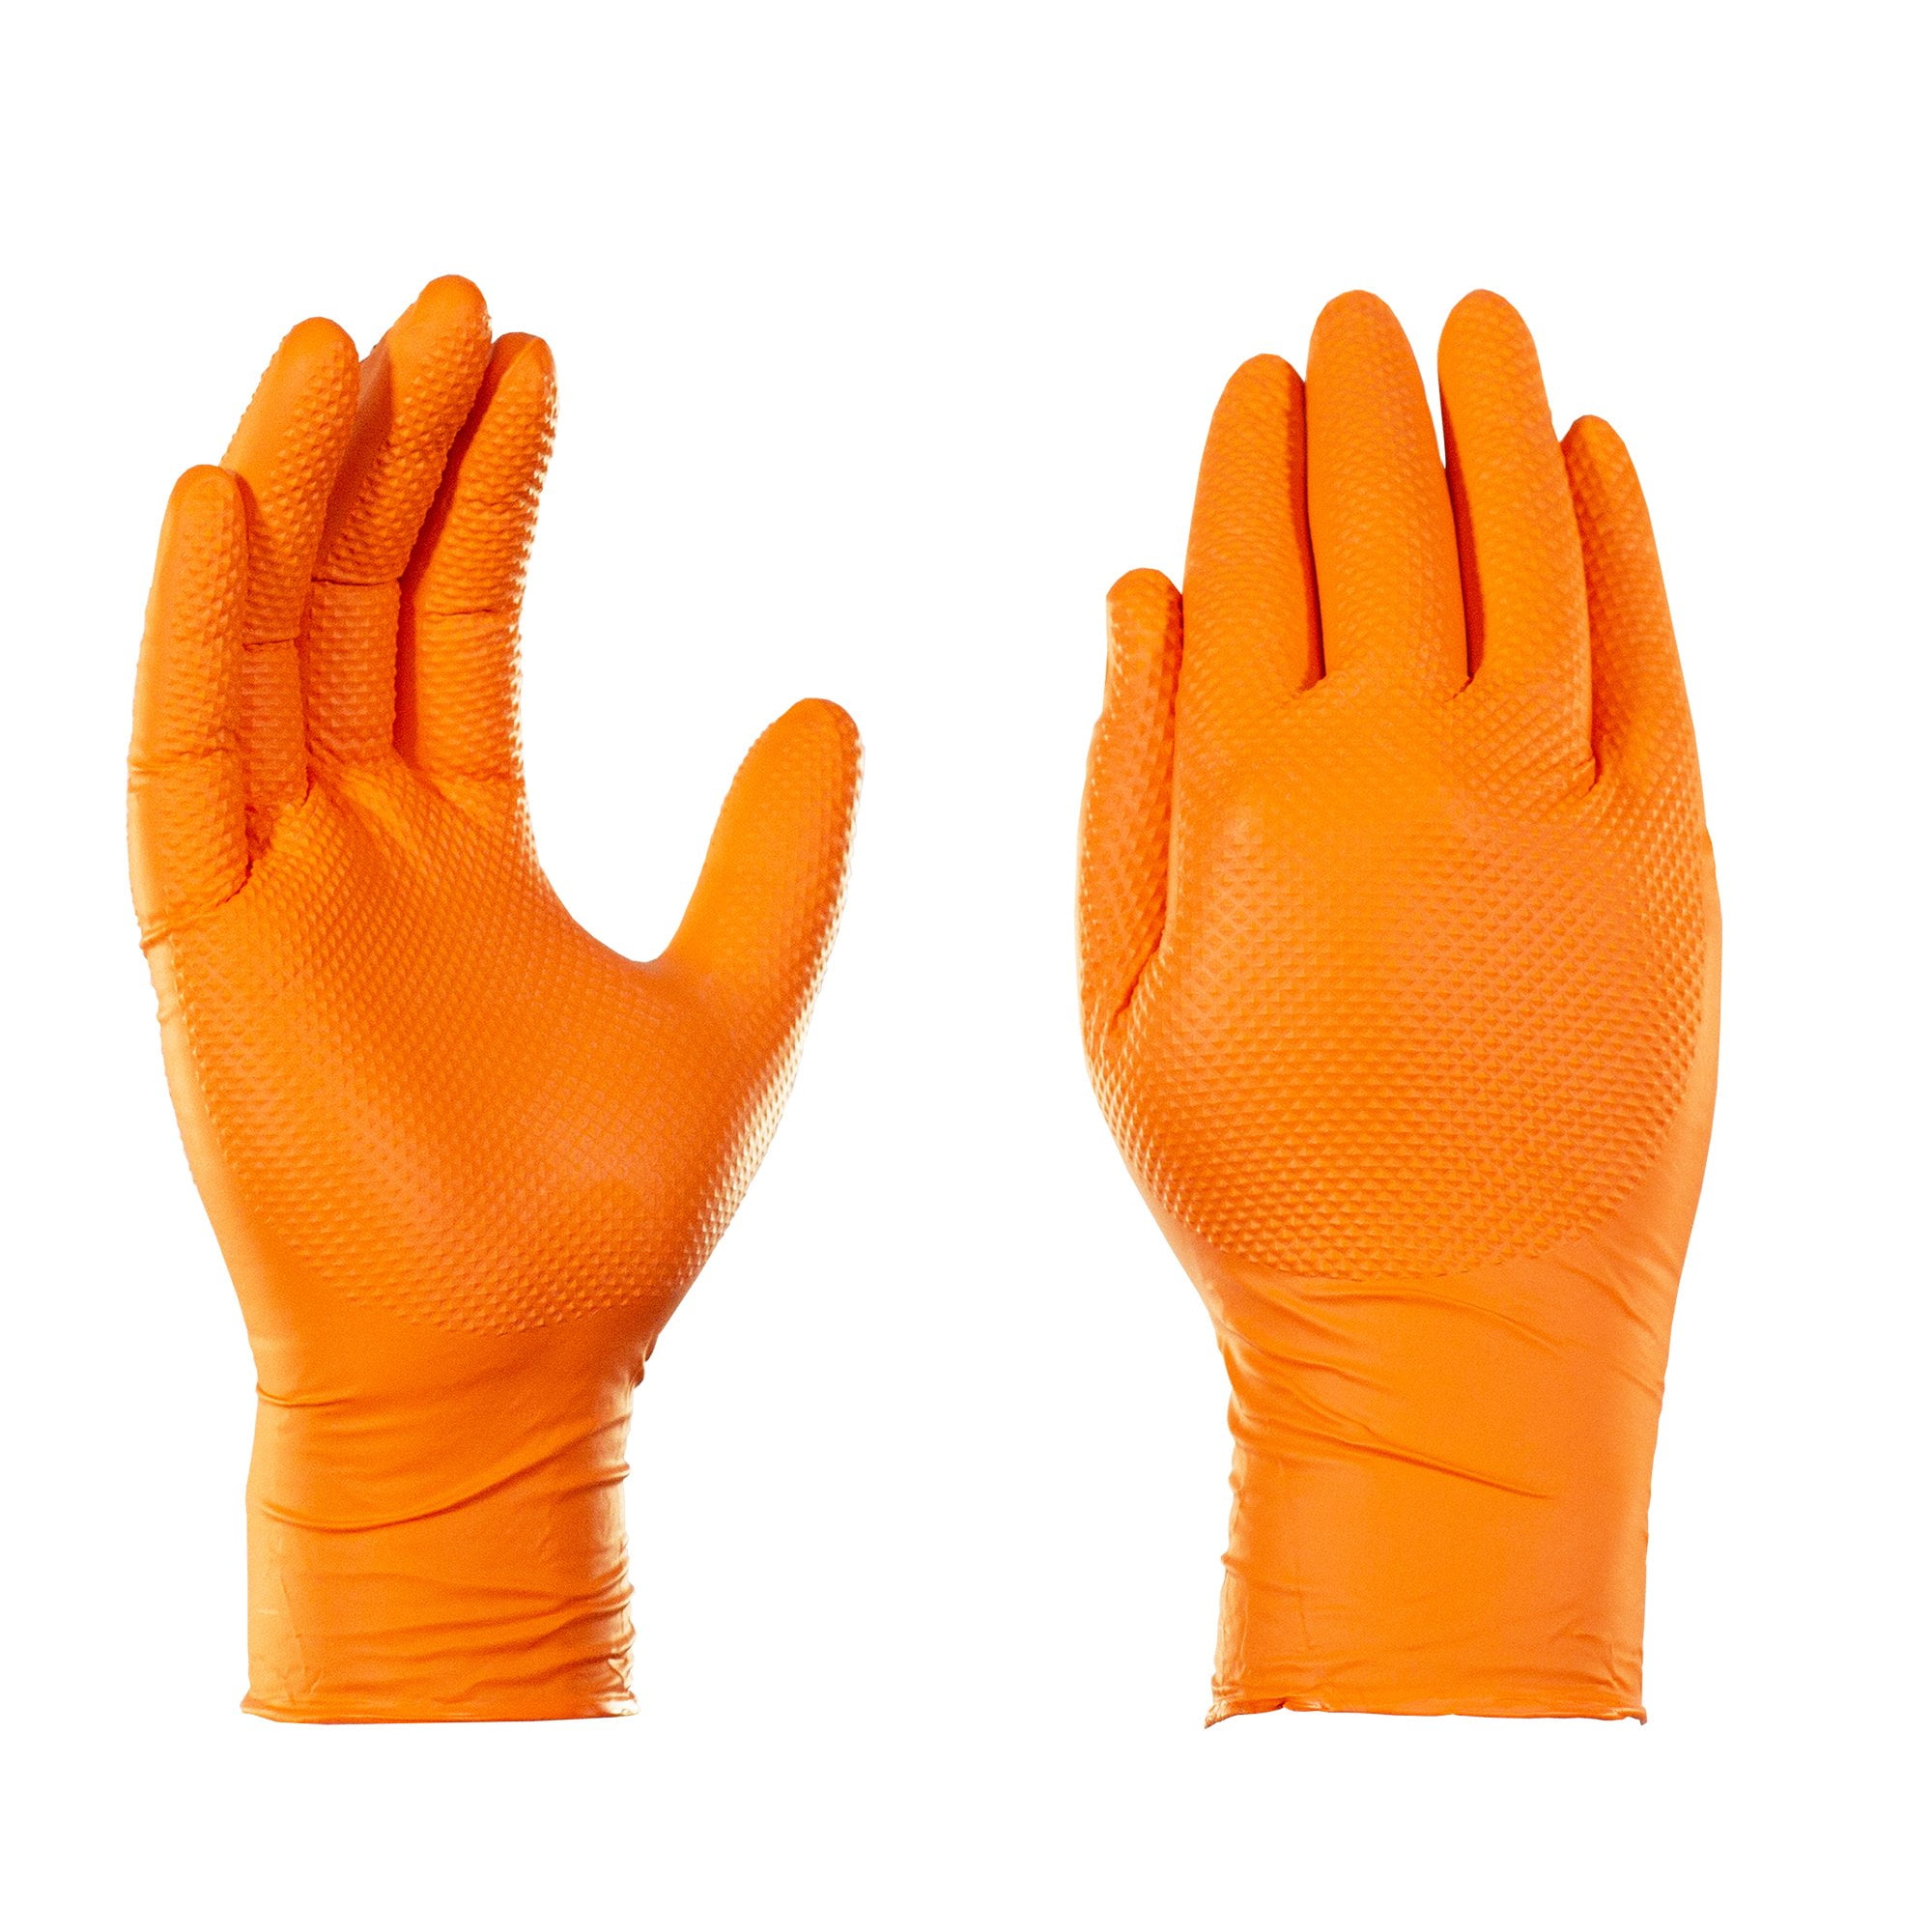 Nitrile Gloves - Heavy Weight - Orange - Textured - (100/Box) - ExtraExtra  Large, Hand Protection, Personal protection, Shop Supplies and Safety